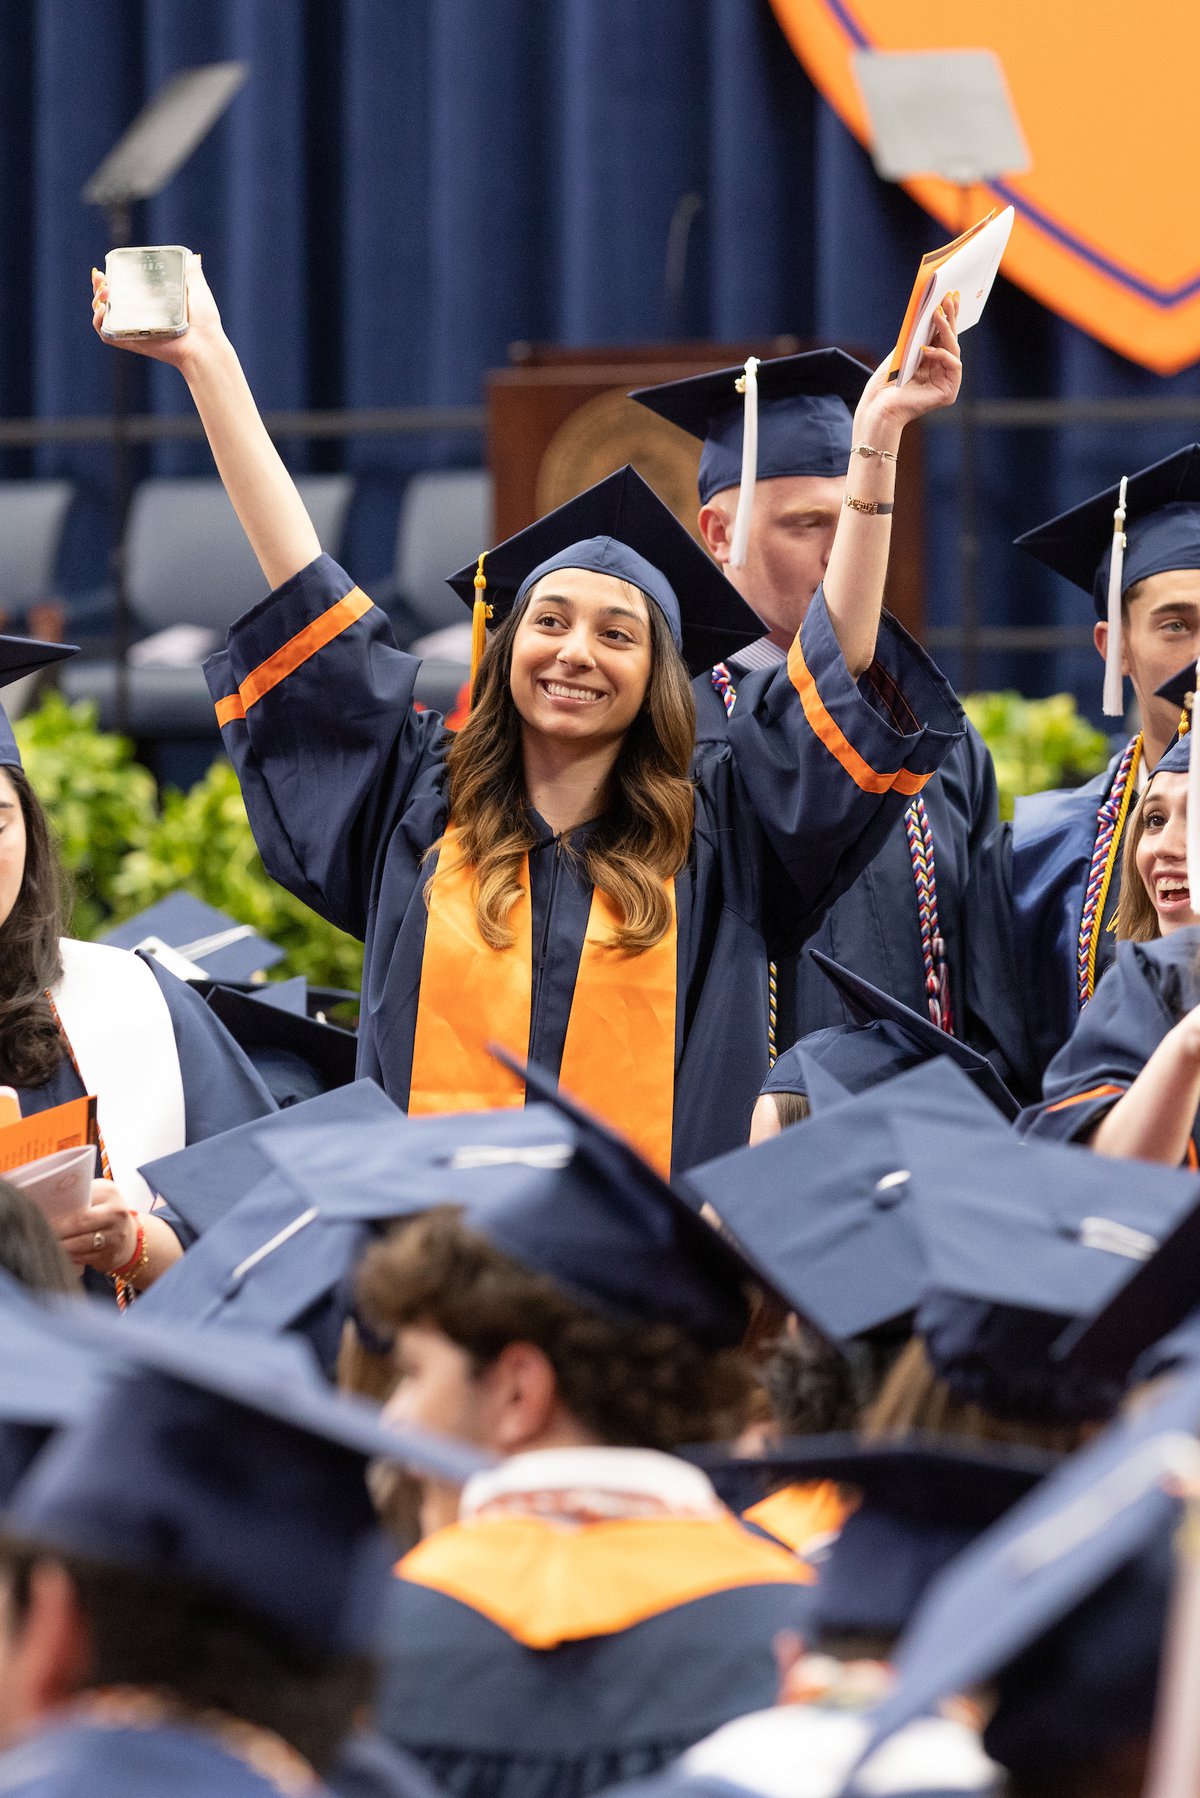 Hands in the air, a student celebrates her graduation.